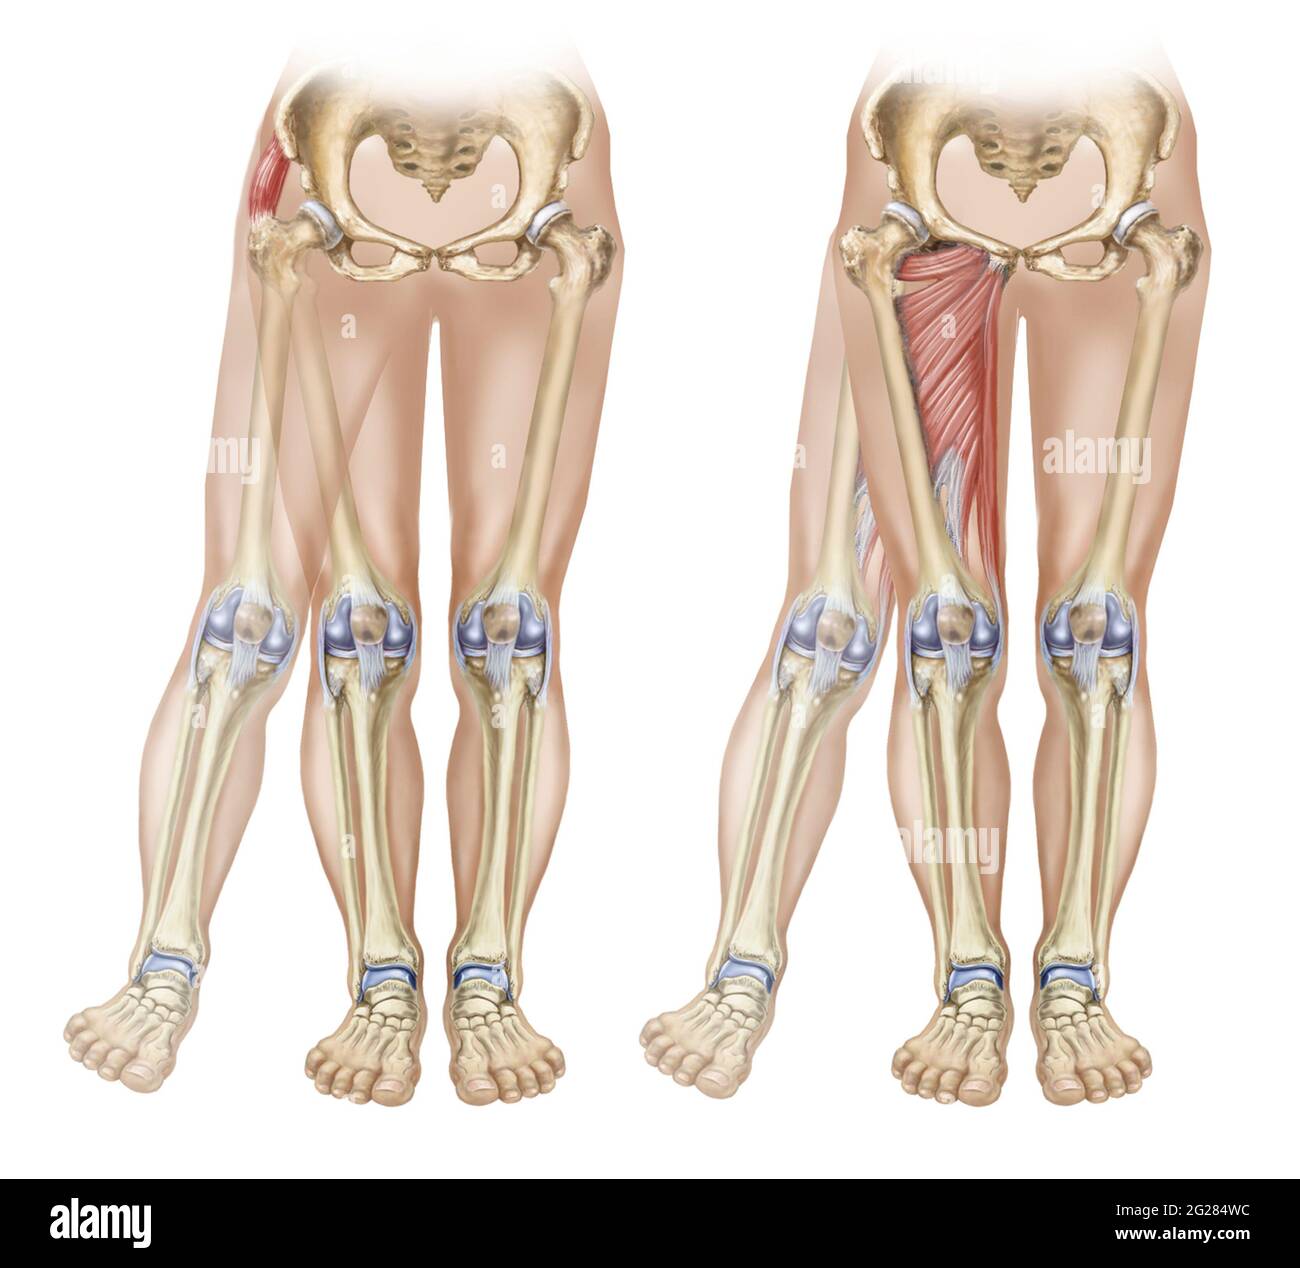 Bones and muscles showing adduction and abduction of the leg. Stock Photo